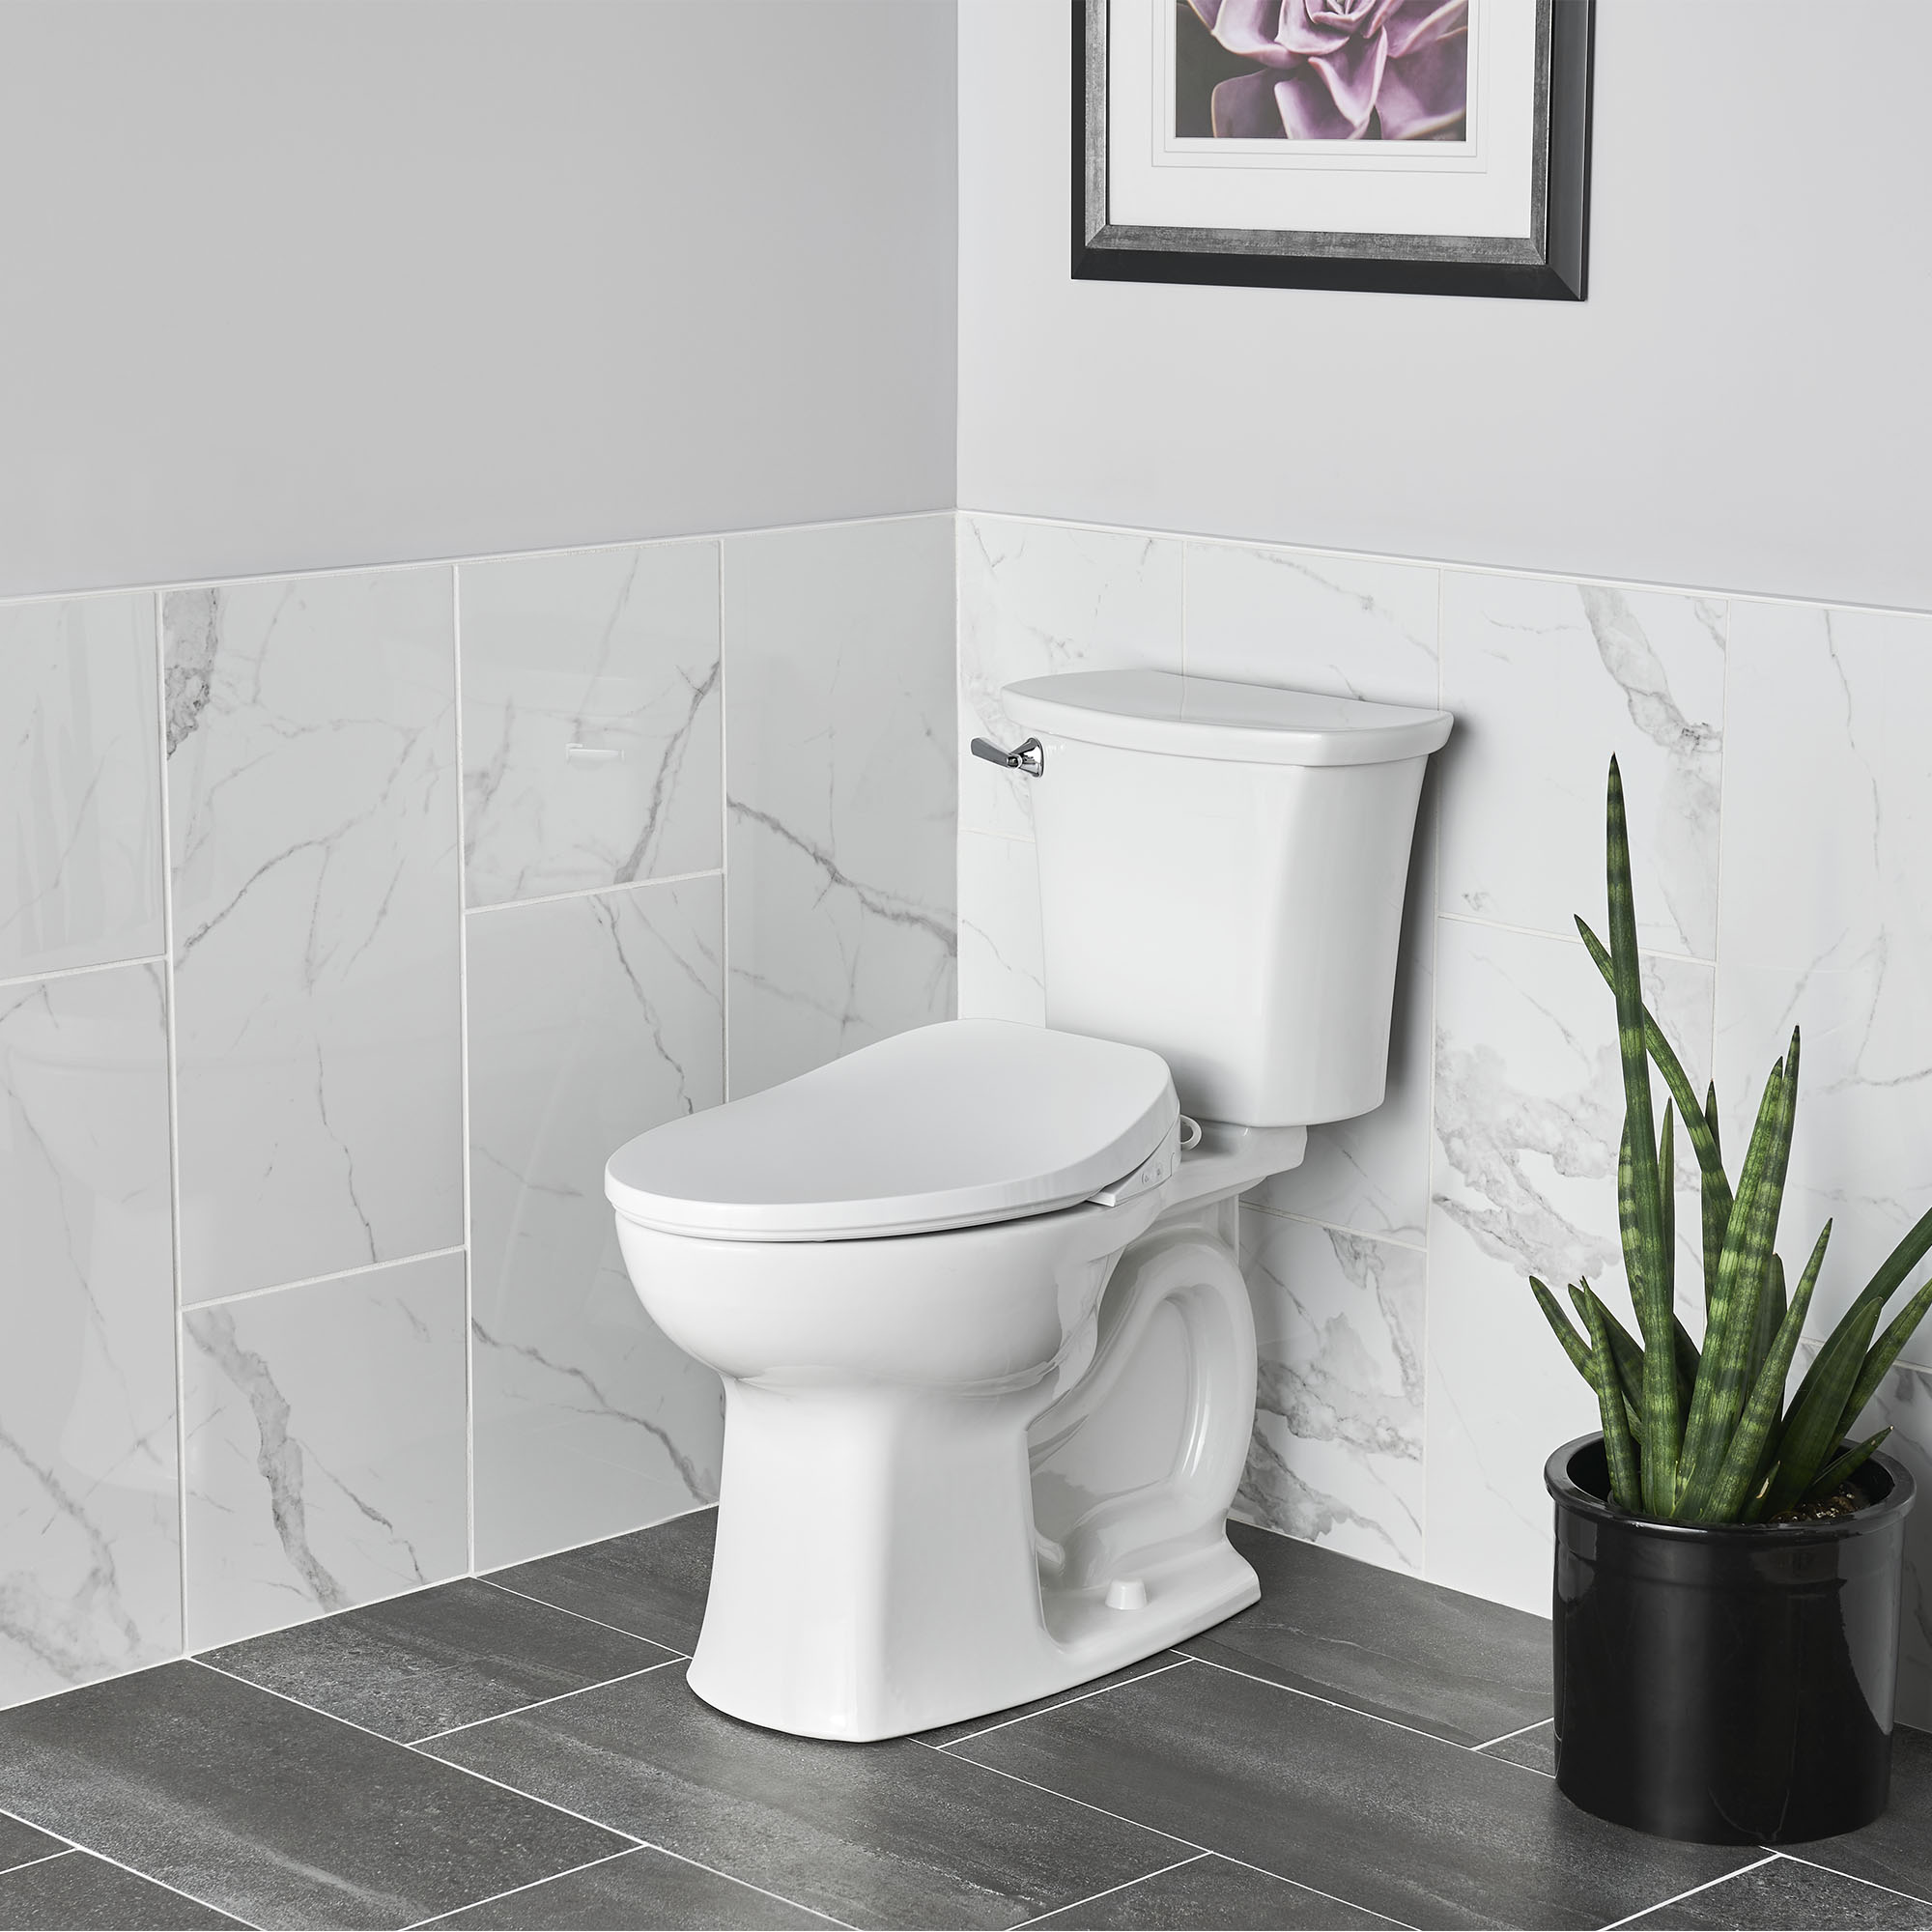 Edgemere® Two-Piece 1.28 gpf/4.8 Lpf Chair-Height Elongated Toilet Less Seat